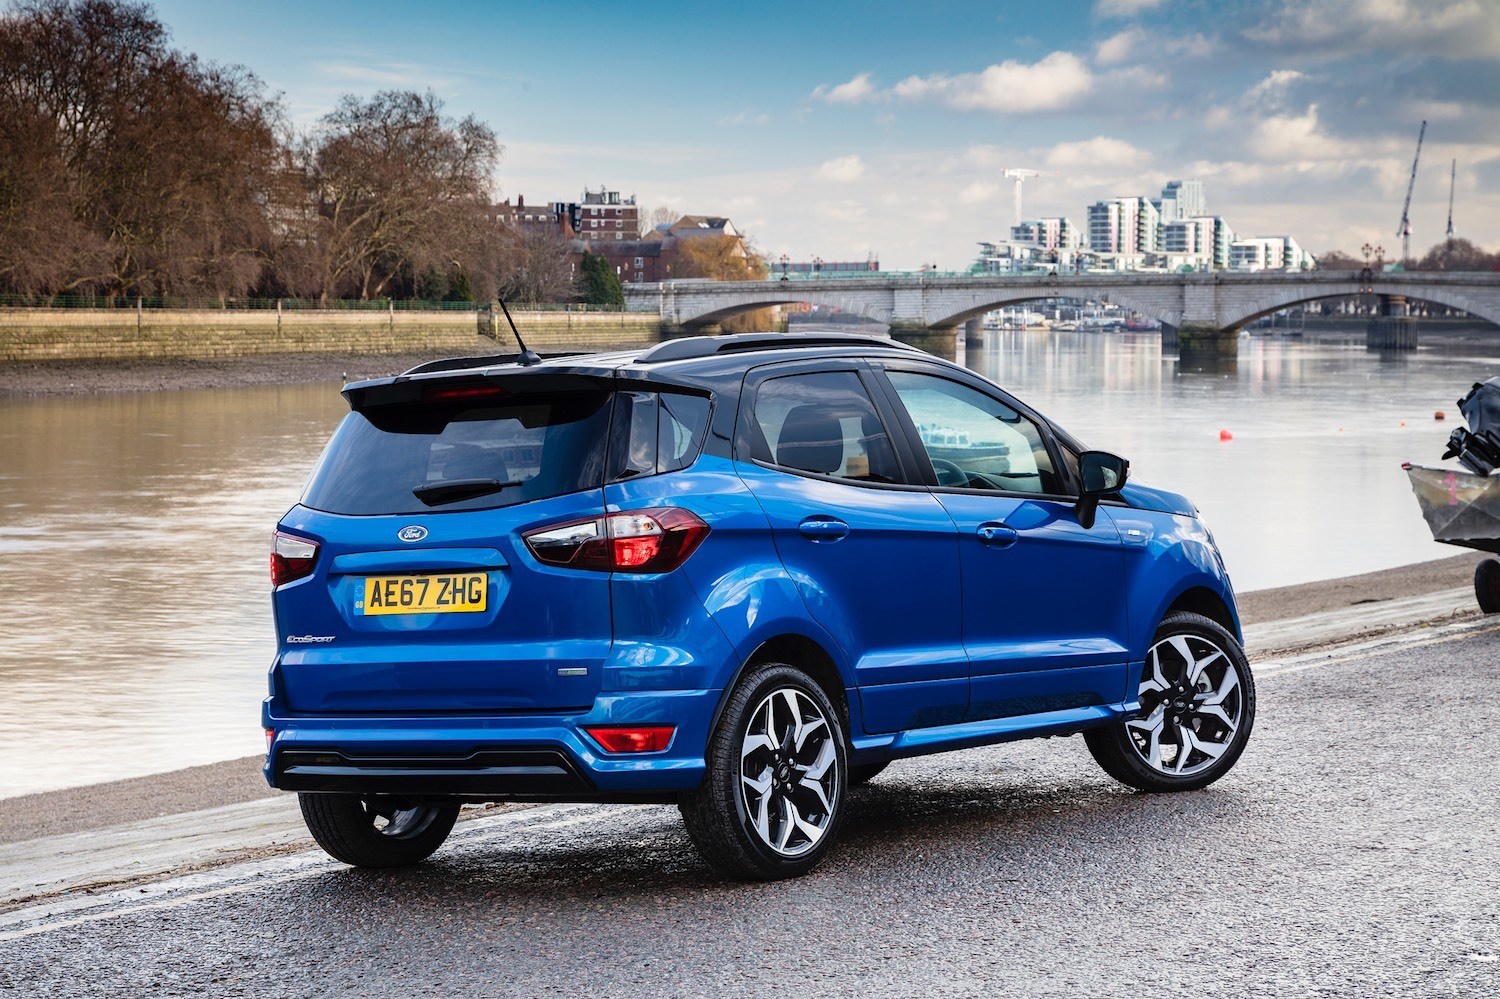 Tom Scanlan reviews the New Ford Ecosport for Drive 9